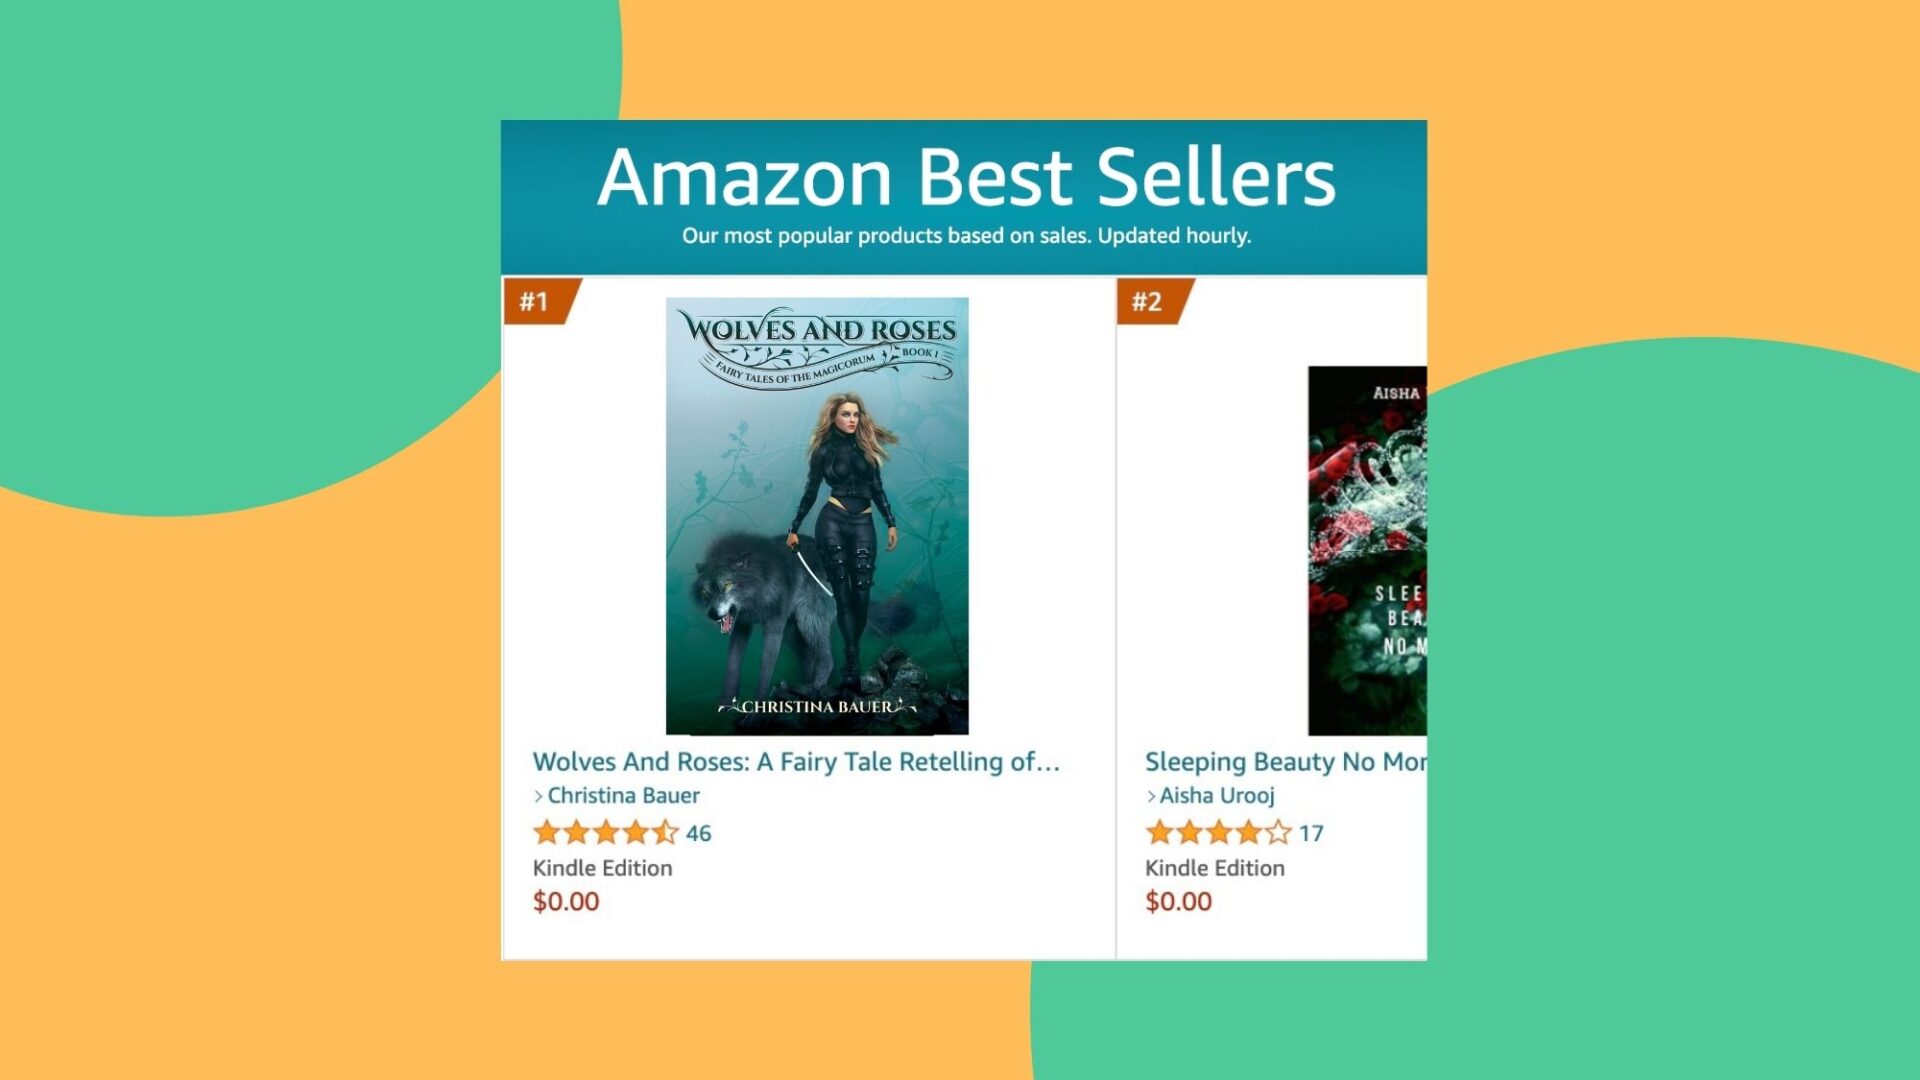 Press Release: WOLVES AND ROSES Achieves #1 Ranking on Amazon